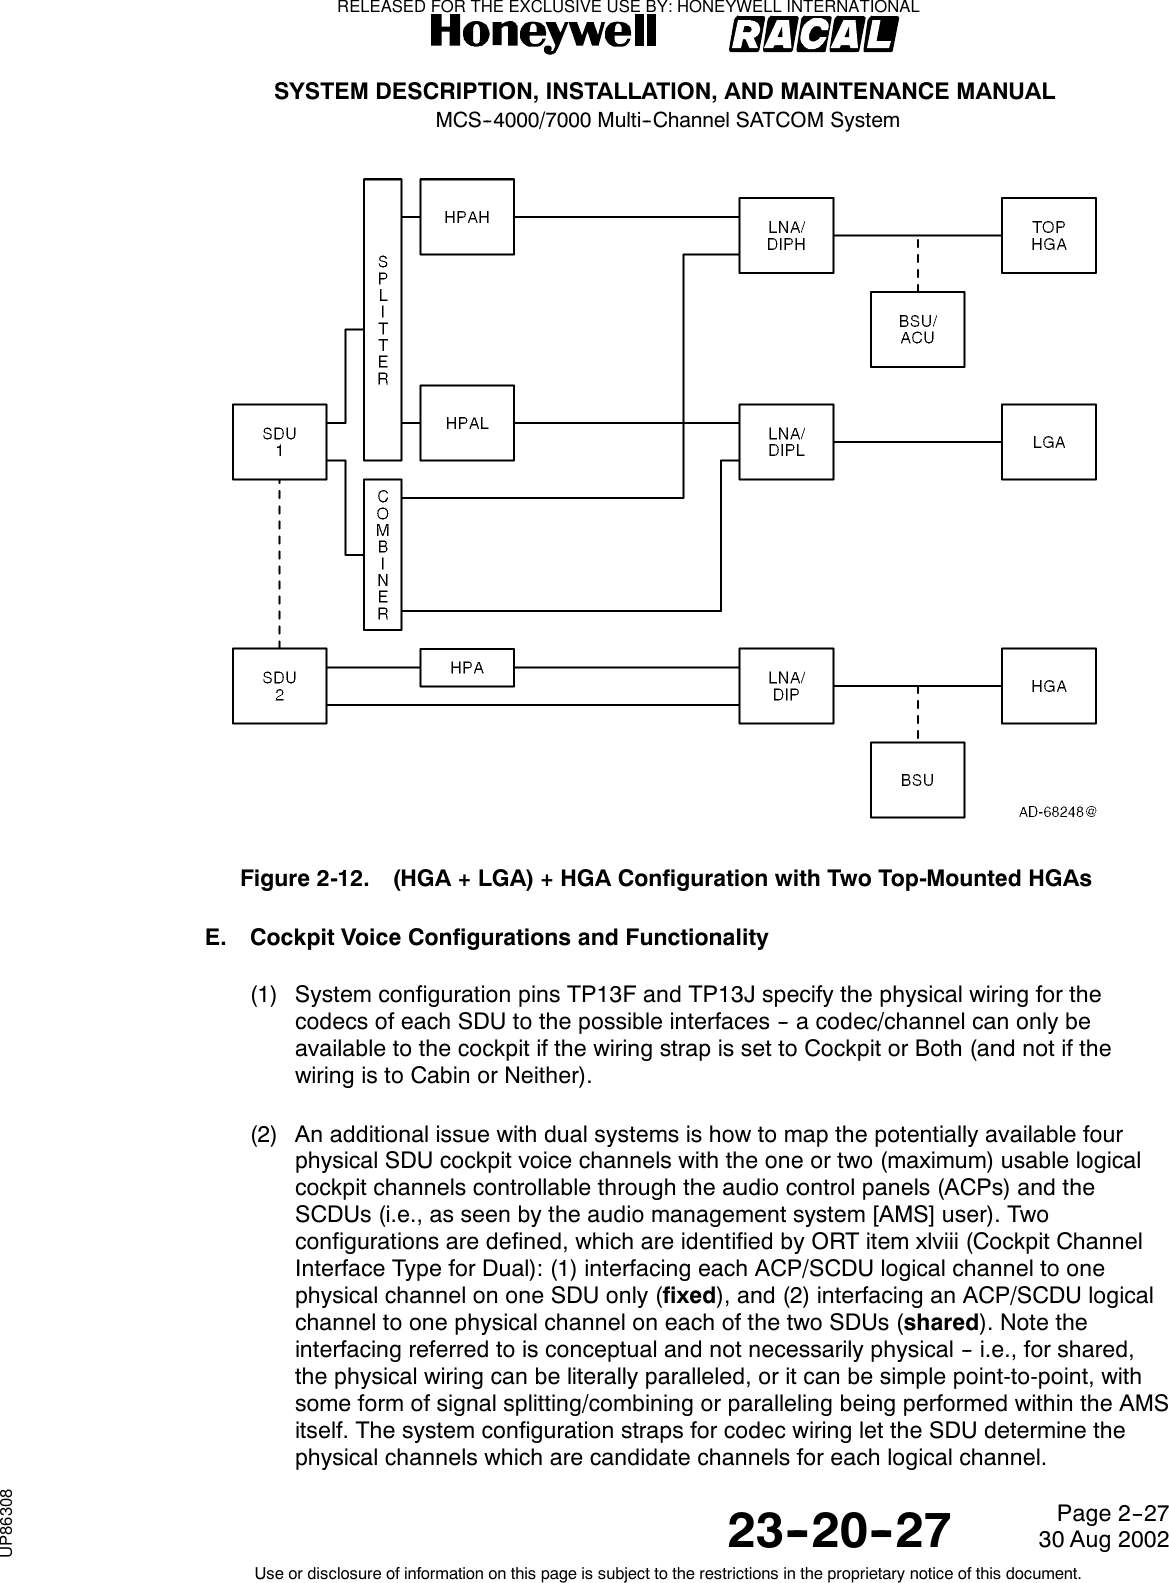 SYSTEM DESCRIPTION, INSTALLATION, AND MAINTENANCE MANUALMCS--4000/7000 Multi--Channel SATCOM System23--20--2730 Aug 2002Use or disclosure of information on this page is subject to the restrictions in the proprietary notice of this document.Page 2--27Figure 2-12. (HGA + LGA) + HGA Configuration with Two Top-Mounted HGAsE. Cockpit Voice Configurations and Functionality(1) System configuration pins TP13F and TP13J specify the physical wiring for thecodecs of each SDU to the possible interfaces -- a codec/channel can only beavailable to the cockpit if the wiring strap is set to Cockpit or Both (and not if thewiring is to Cabin or Neither).(2) An additional issue with dual systems is how to map the potentially available fourphysical SDU cockpit voice channels with the one or two (maximum) usable logicalcockpit channels controllable through the audio control panels (ACPs) and theSCDUs (i.e., as seen by the audio management system [AMS] user). Twoconfigurations are defined, which are identified by ORT item xlviii (Cockpit ChannelInterface Type for Dual): (1) interfacing each ACP/SCDU logical channel to onephysical channel on one SDU only (fixed),and(2)interfacinganACP/SCDUlogicalchannel to one physical channel on each of the two SDUs (shared). Note theinterfacing referred to is conceptual and not necessarily physical -- i.e., for shared,the physical wiring can be literally paralleled, or it can be simple point-to-point, withsome form of signal splitting/combining or paralleling being performed within the AMSitself. The system configuration straps for codec wiring let the SDU determine thephysical channels which are candidate channels for each logical channel.RELEASED FOR THE EXCLUSIVE USE BY: HONEYWELL INTERNATIONALUP86308